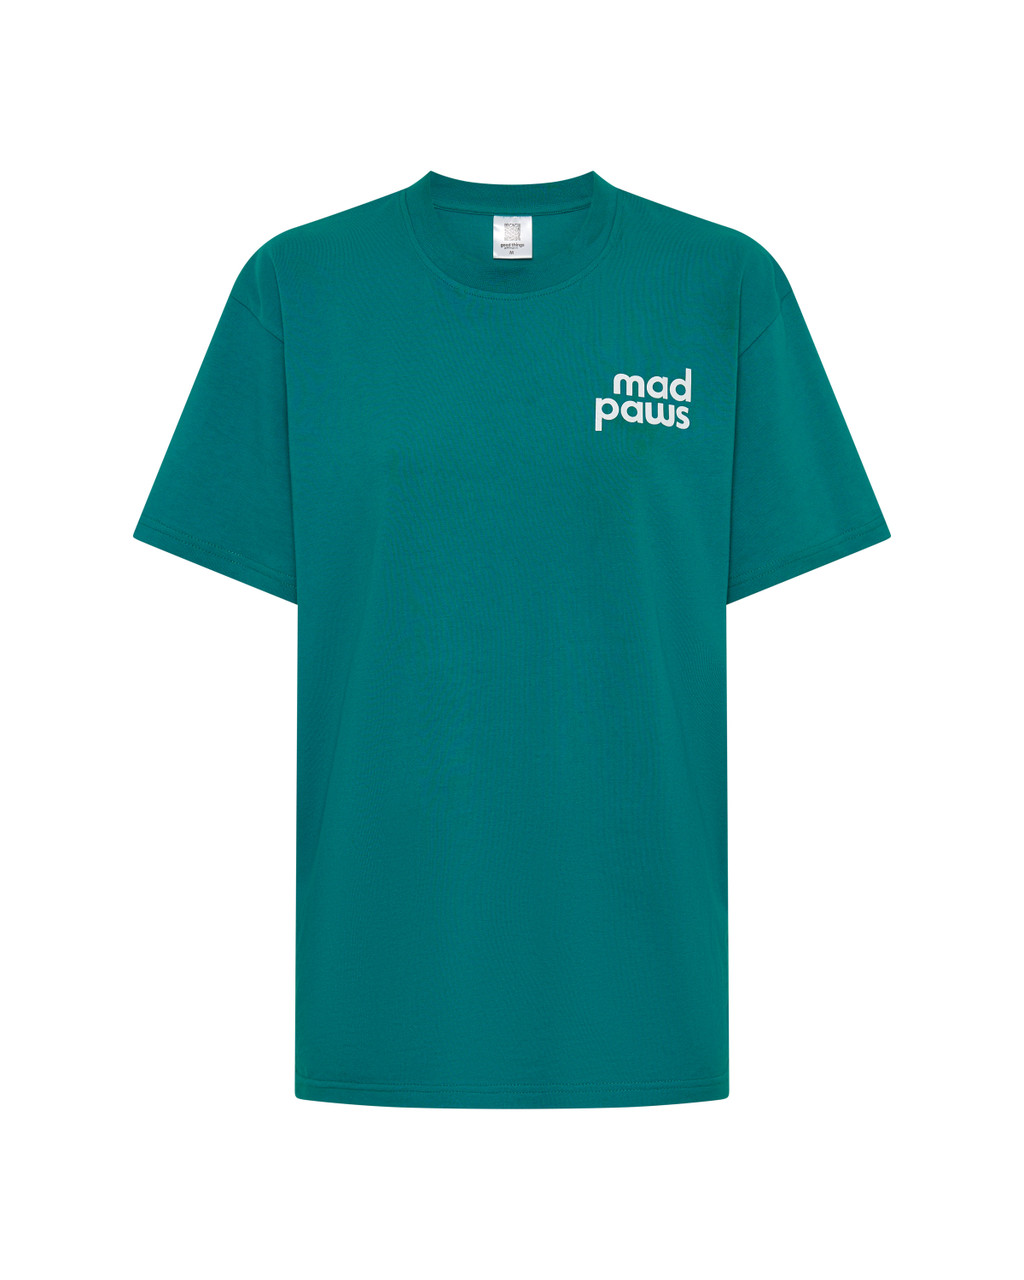 Mad Paws T-Shirt Unisex Teal